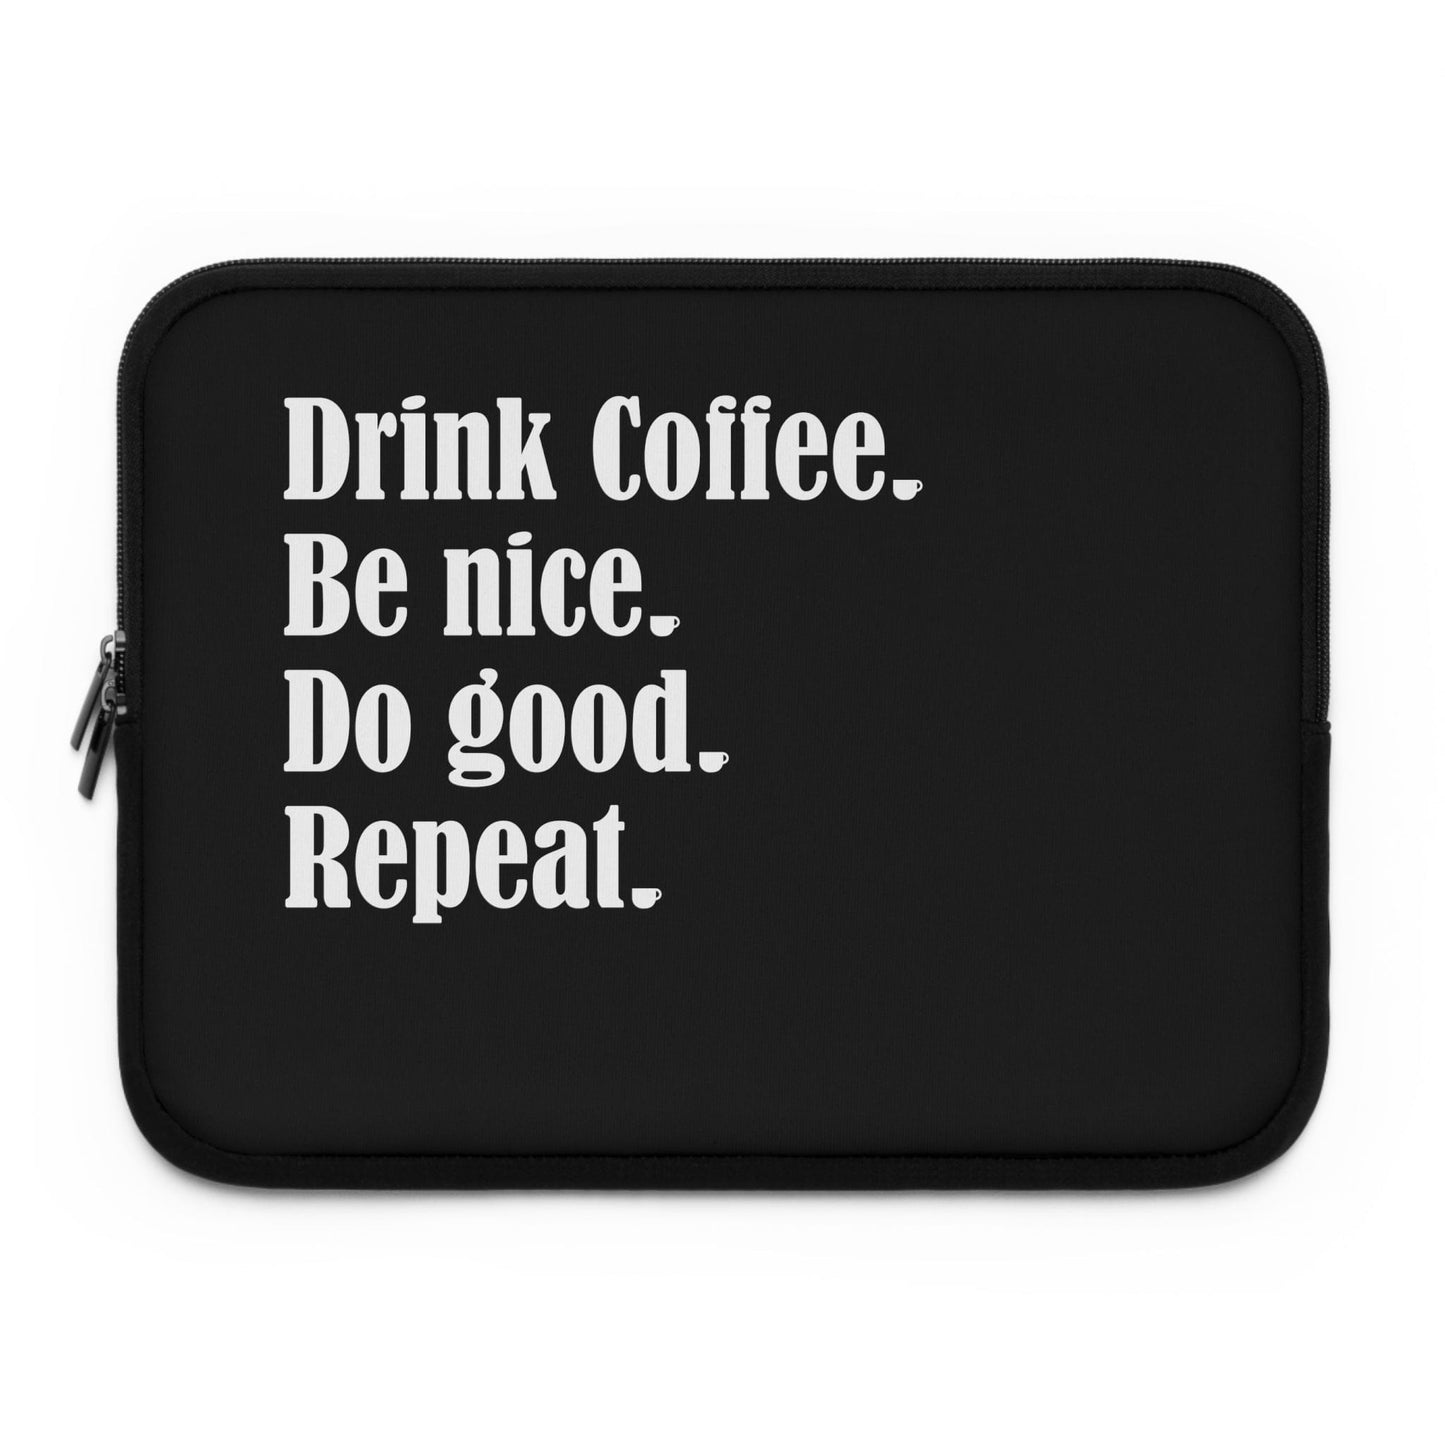 Good Bean Gifts "Drink Coffee, Be Nice, Do Good, Repeat" Laptop Sleeve Black / 13"